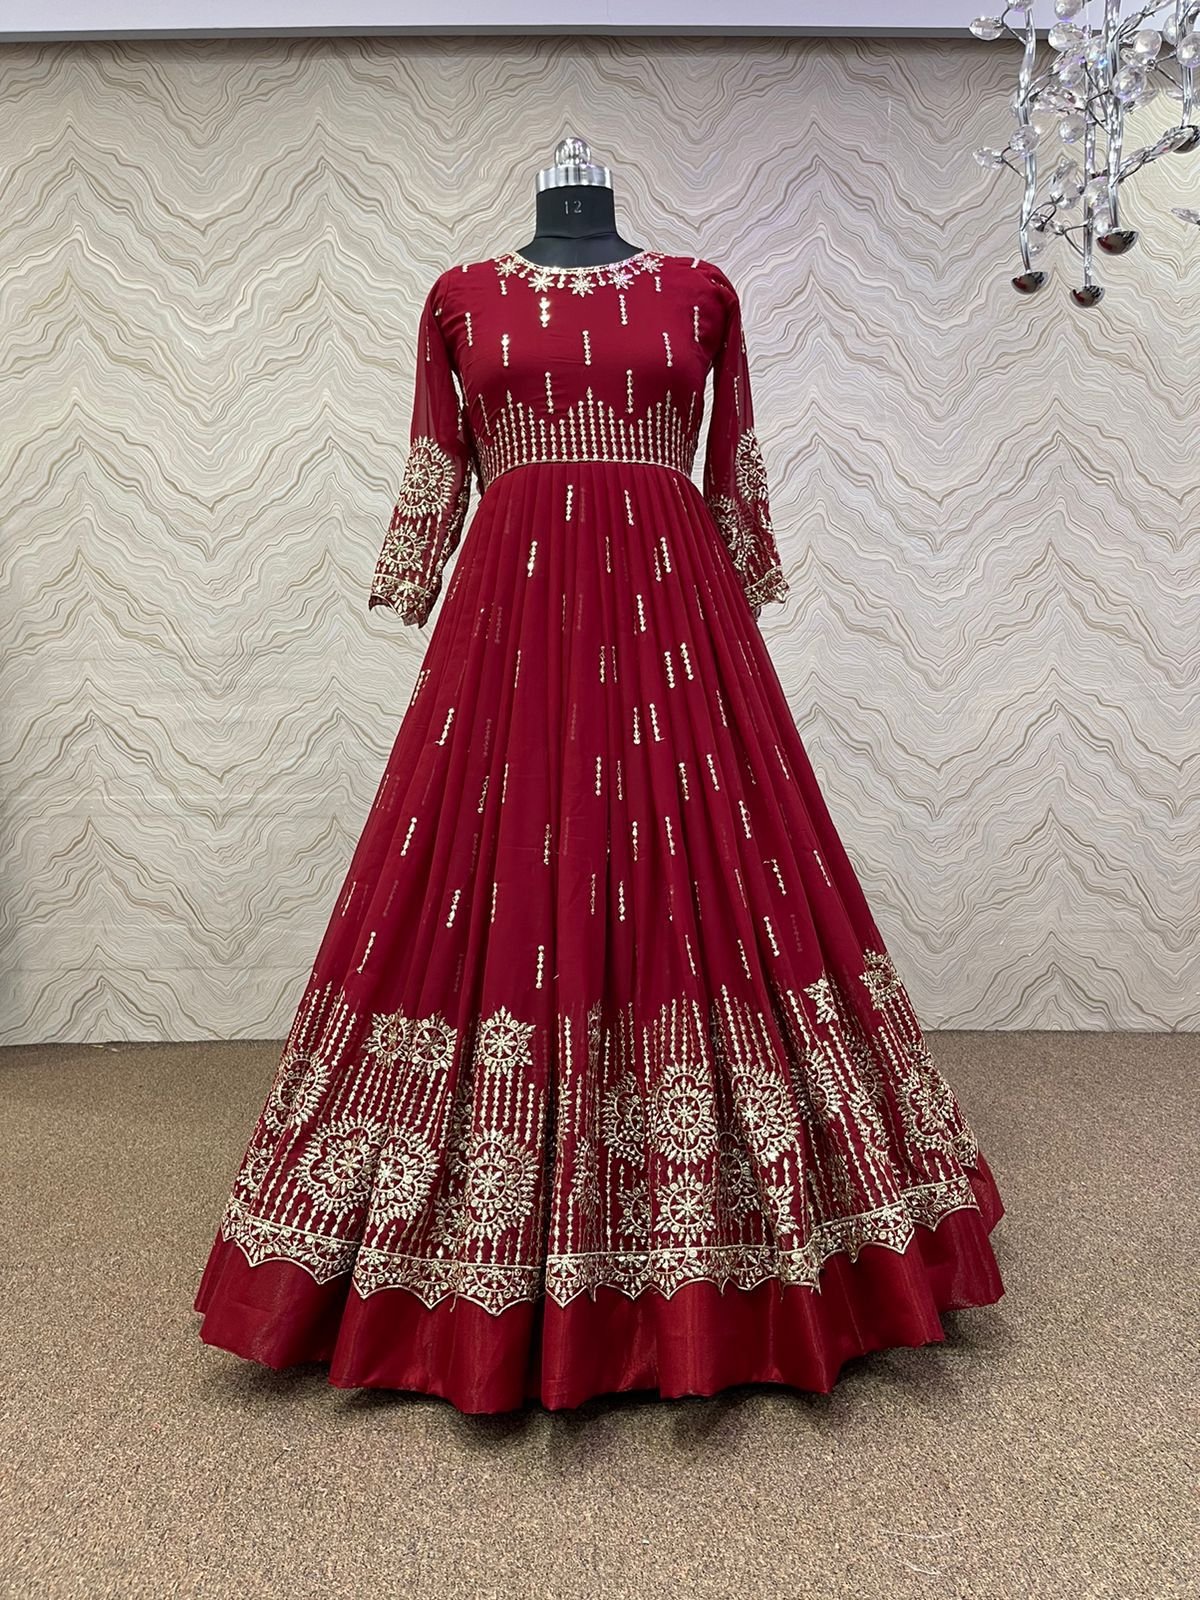 Buy Full Stitched Handwork Embroidered,Beaded, Crystal Beads, Sequence  Fully finie Finished Work & Golden Marron Work Gown Dress (S) at Amazon.in